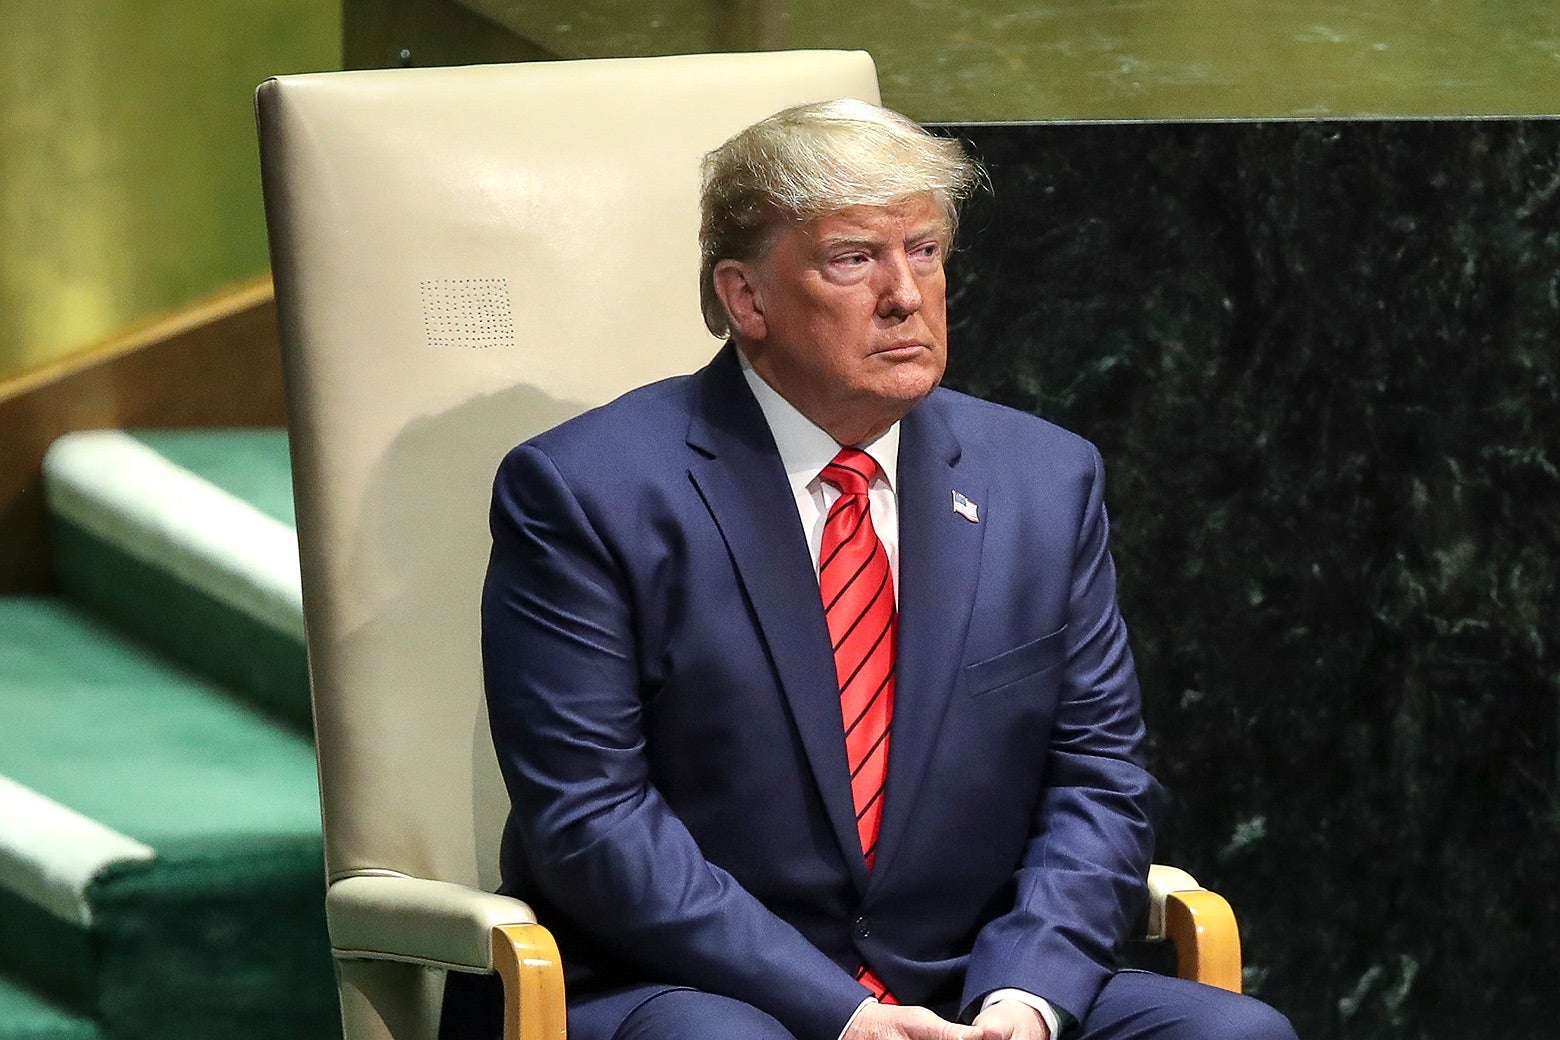 Donald Trump waits to take the stage to speak at the United Nations General Assembly.